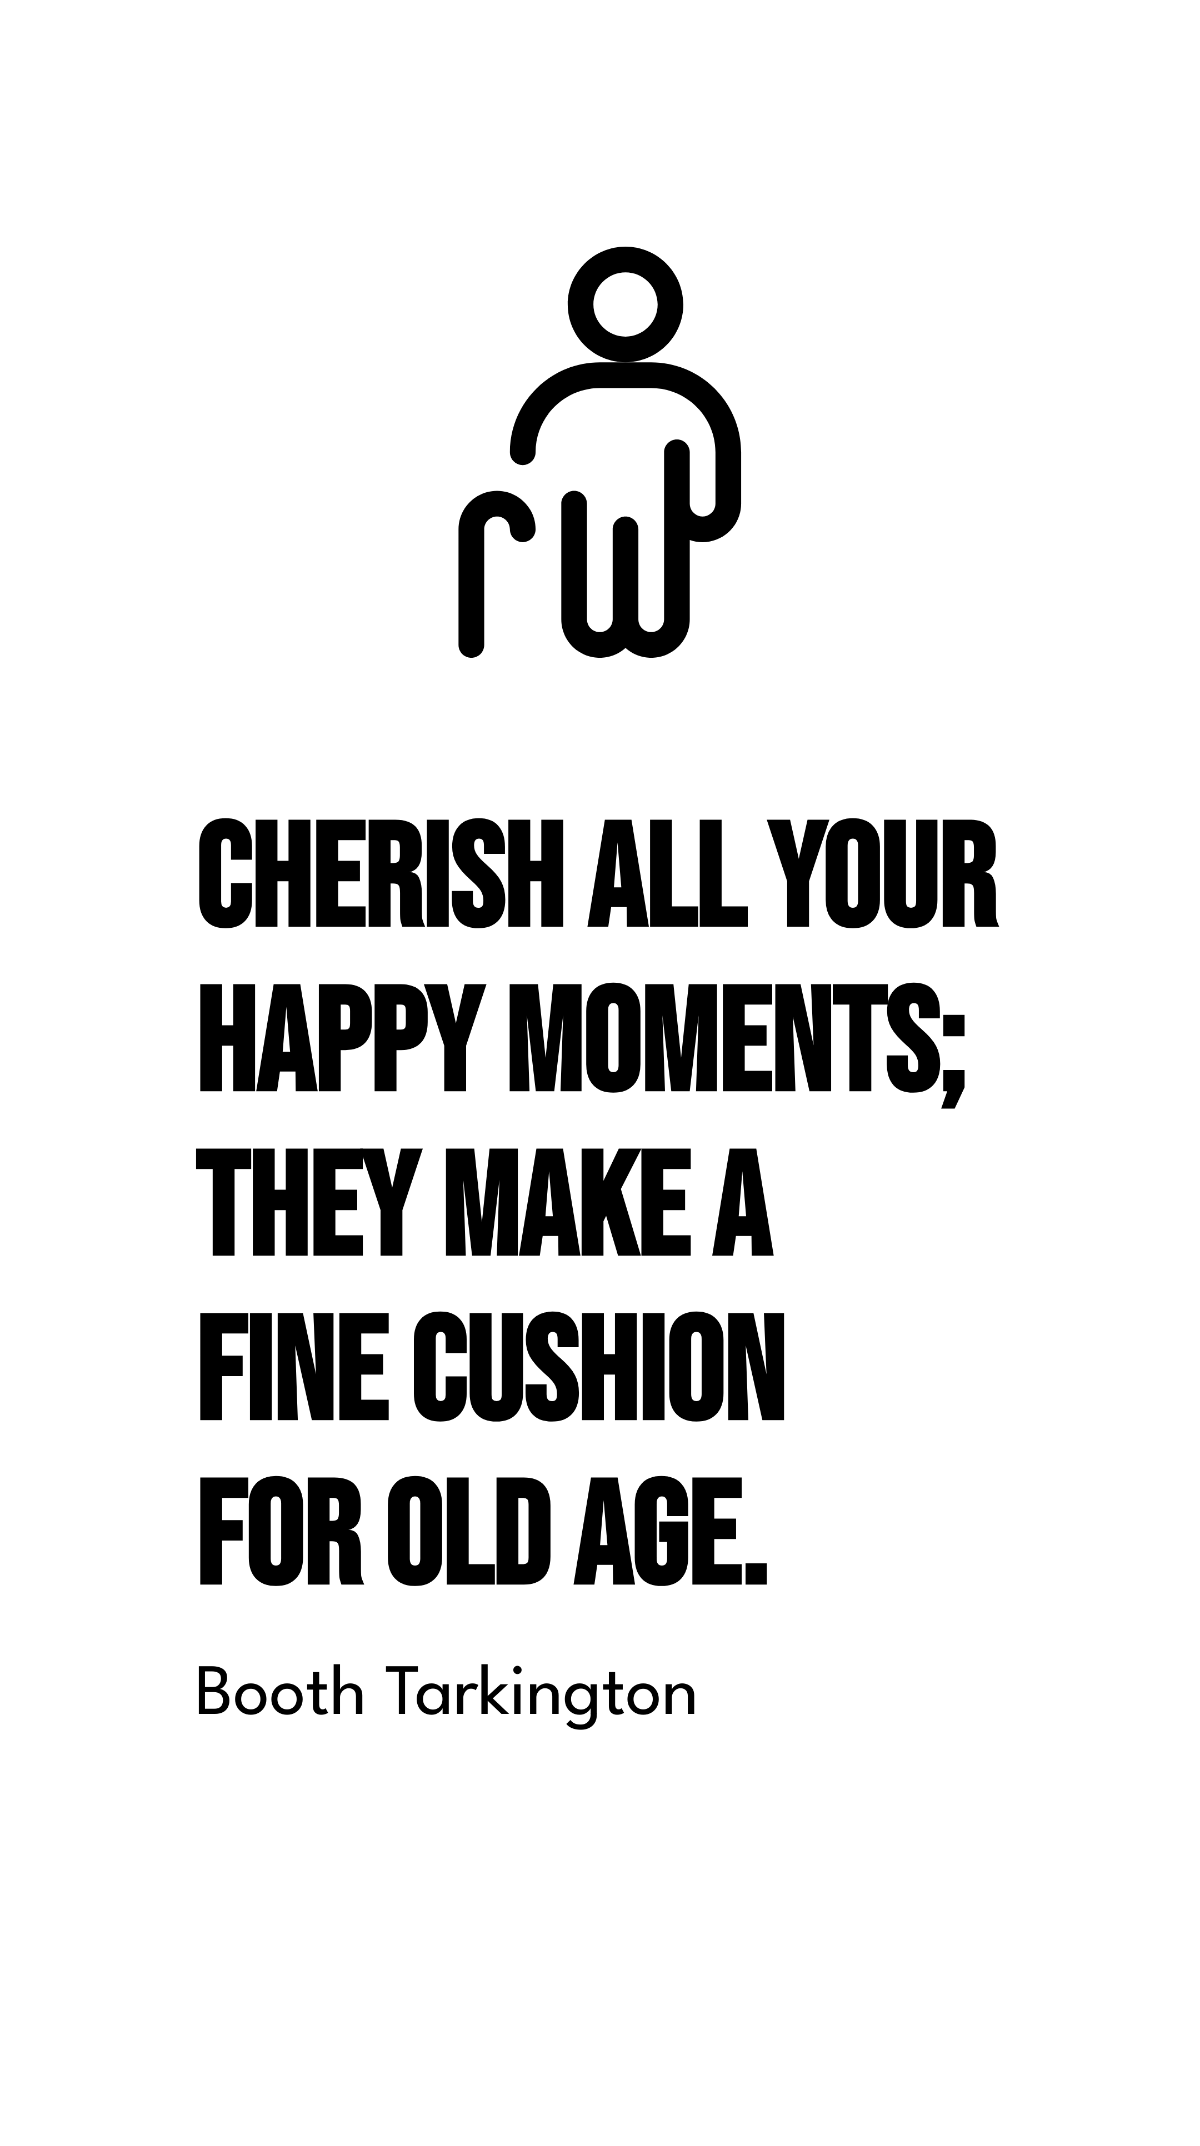 Booth Tarkington - Cherish all your happy moments; they make a fine cushion for old age. Template